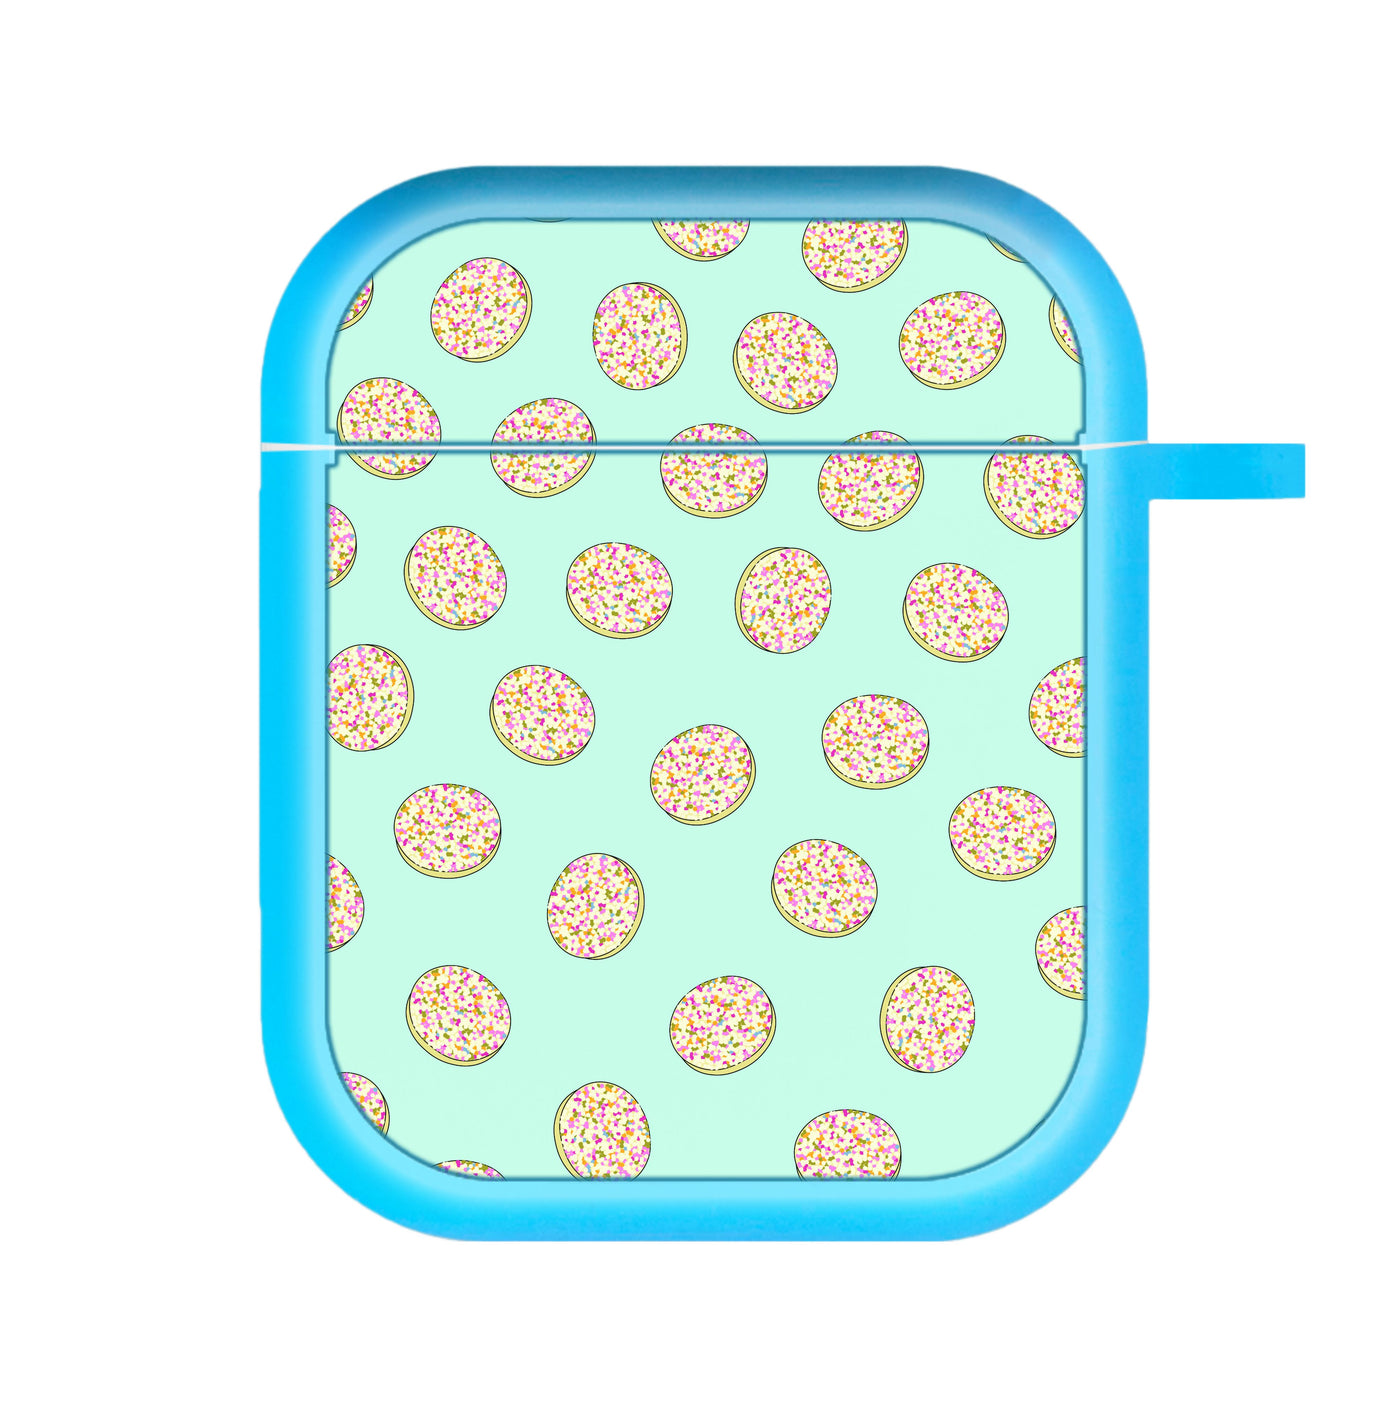 Jazzles - Sweets Patterns AirPods Case